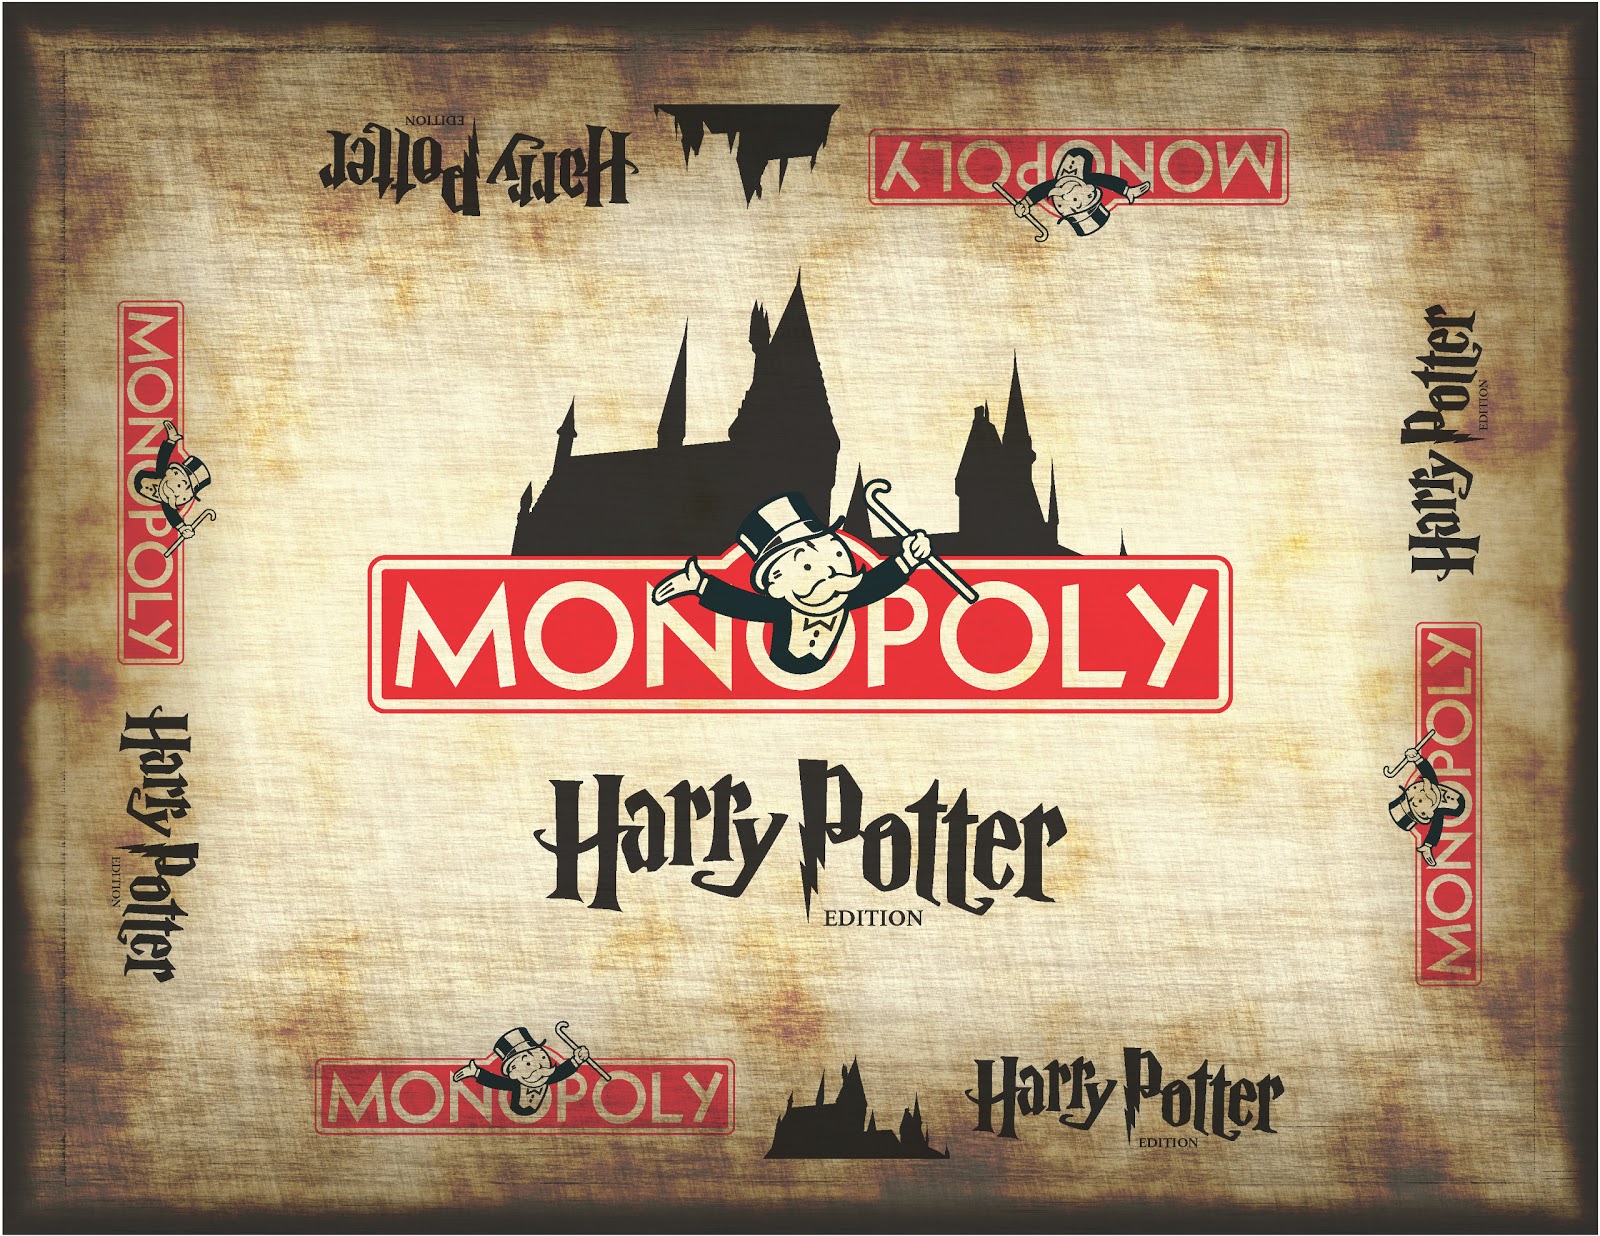 Design + Technology Education: How to Make Harry Potter Monopoly